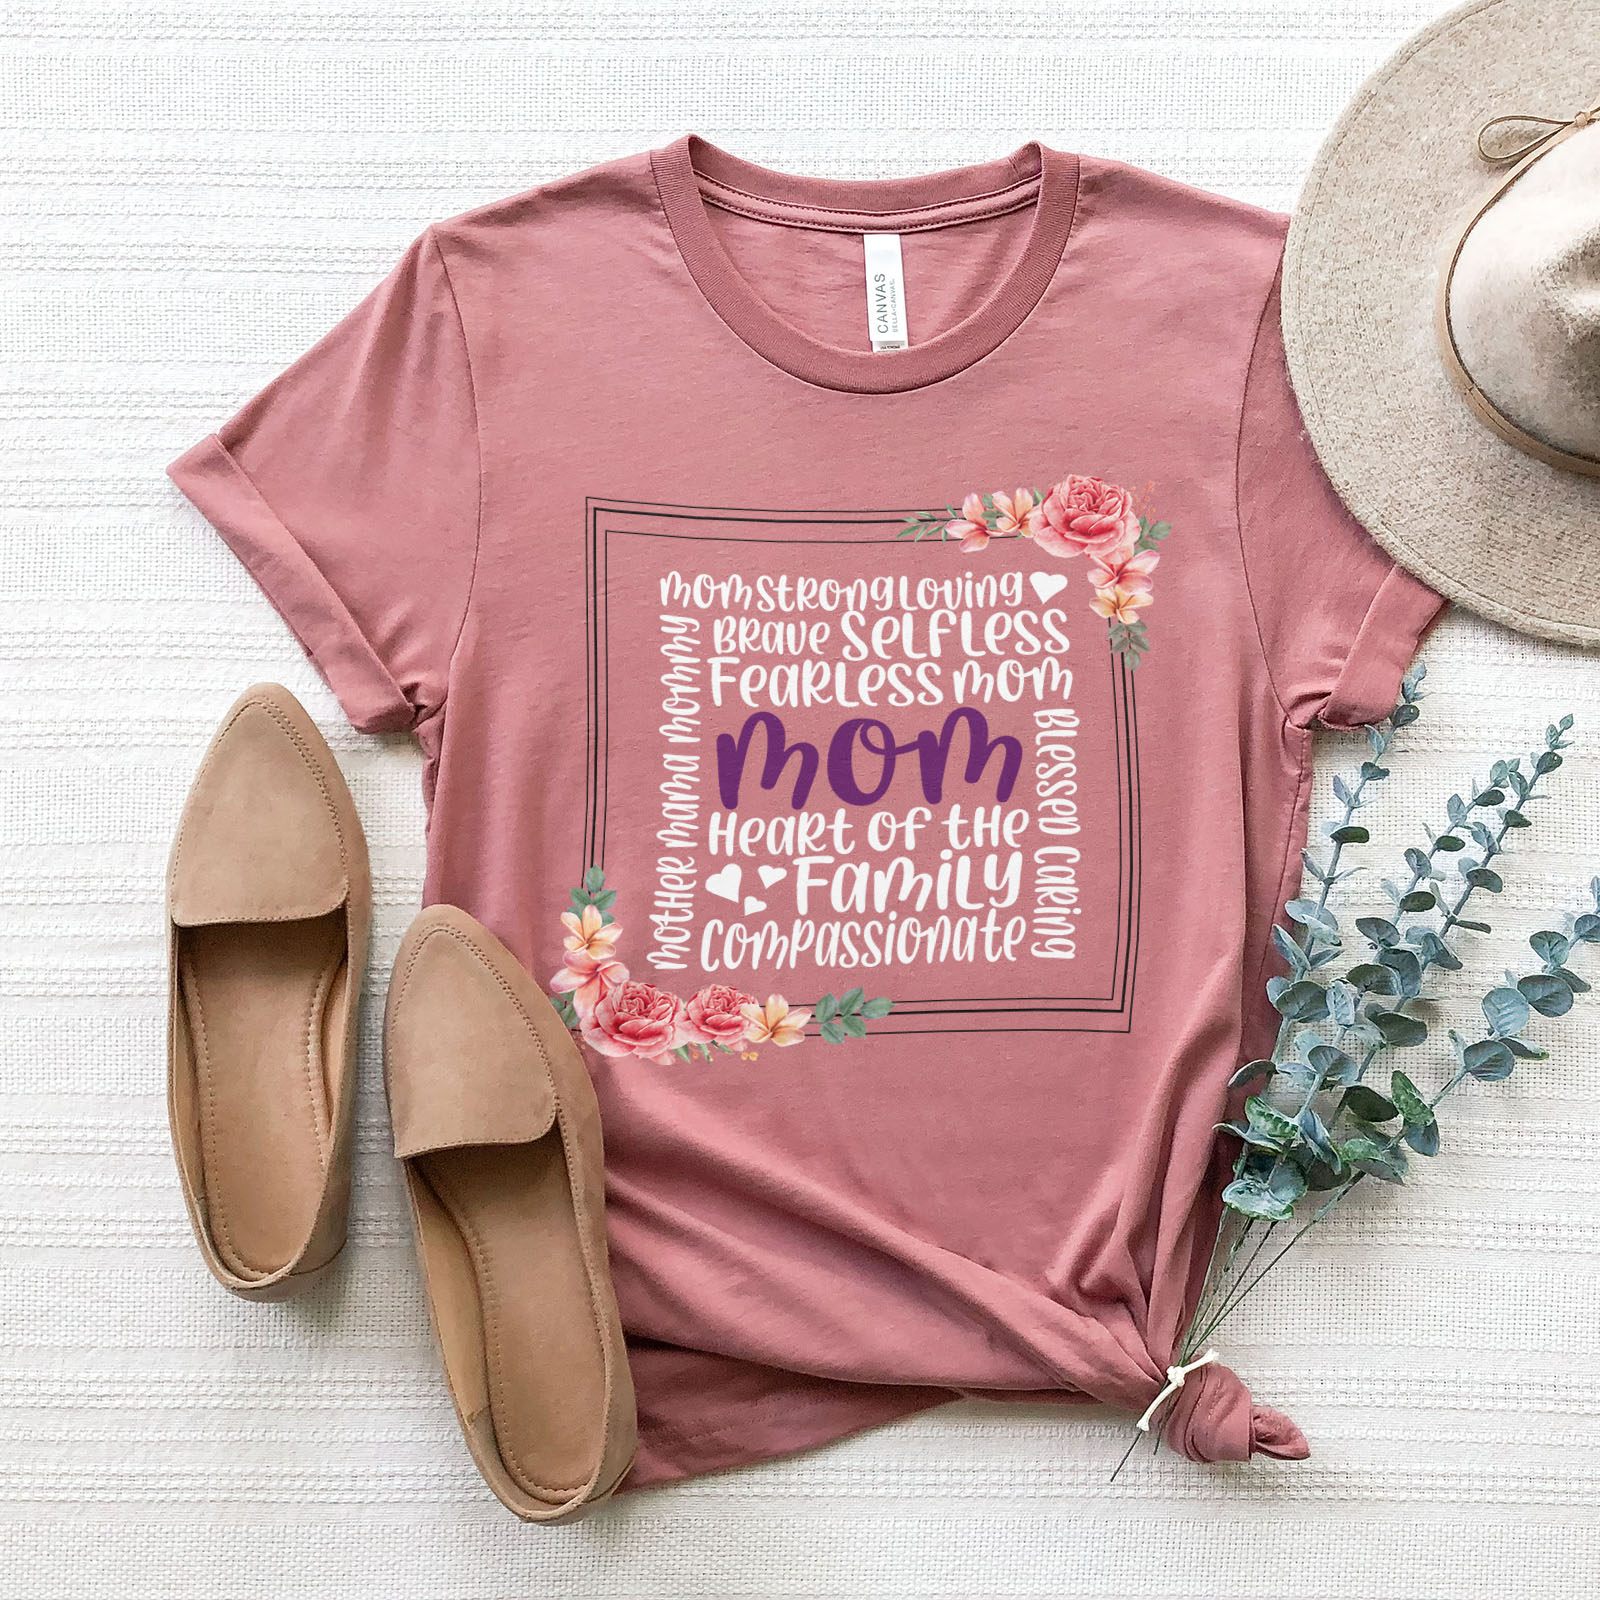 Mom Heart Of The Family Tee Shirts For Women - Christian Shirts for Women - Religious Tee Shirts